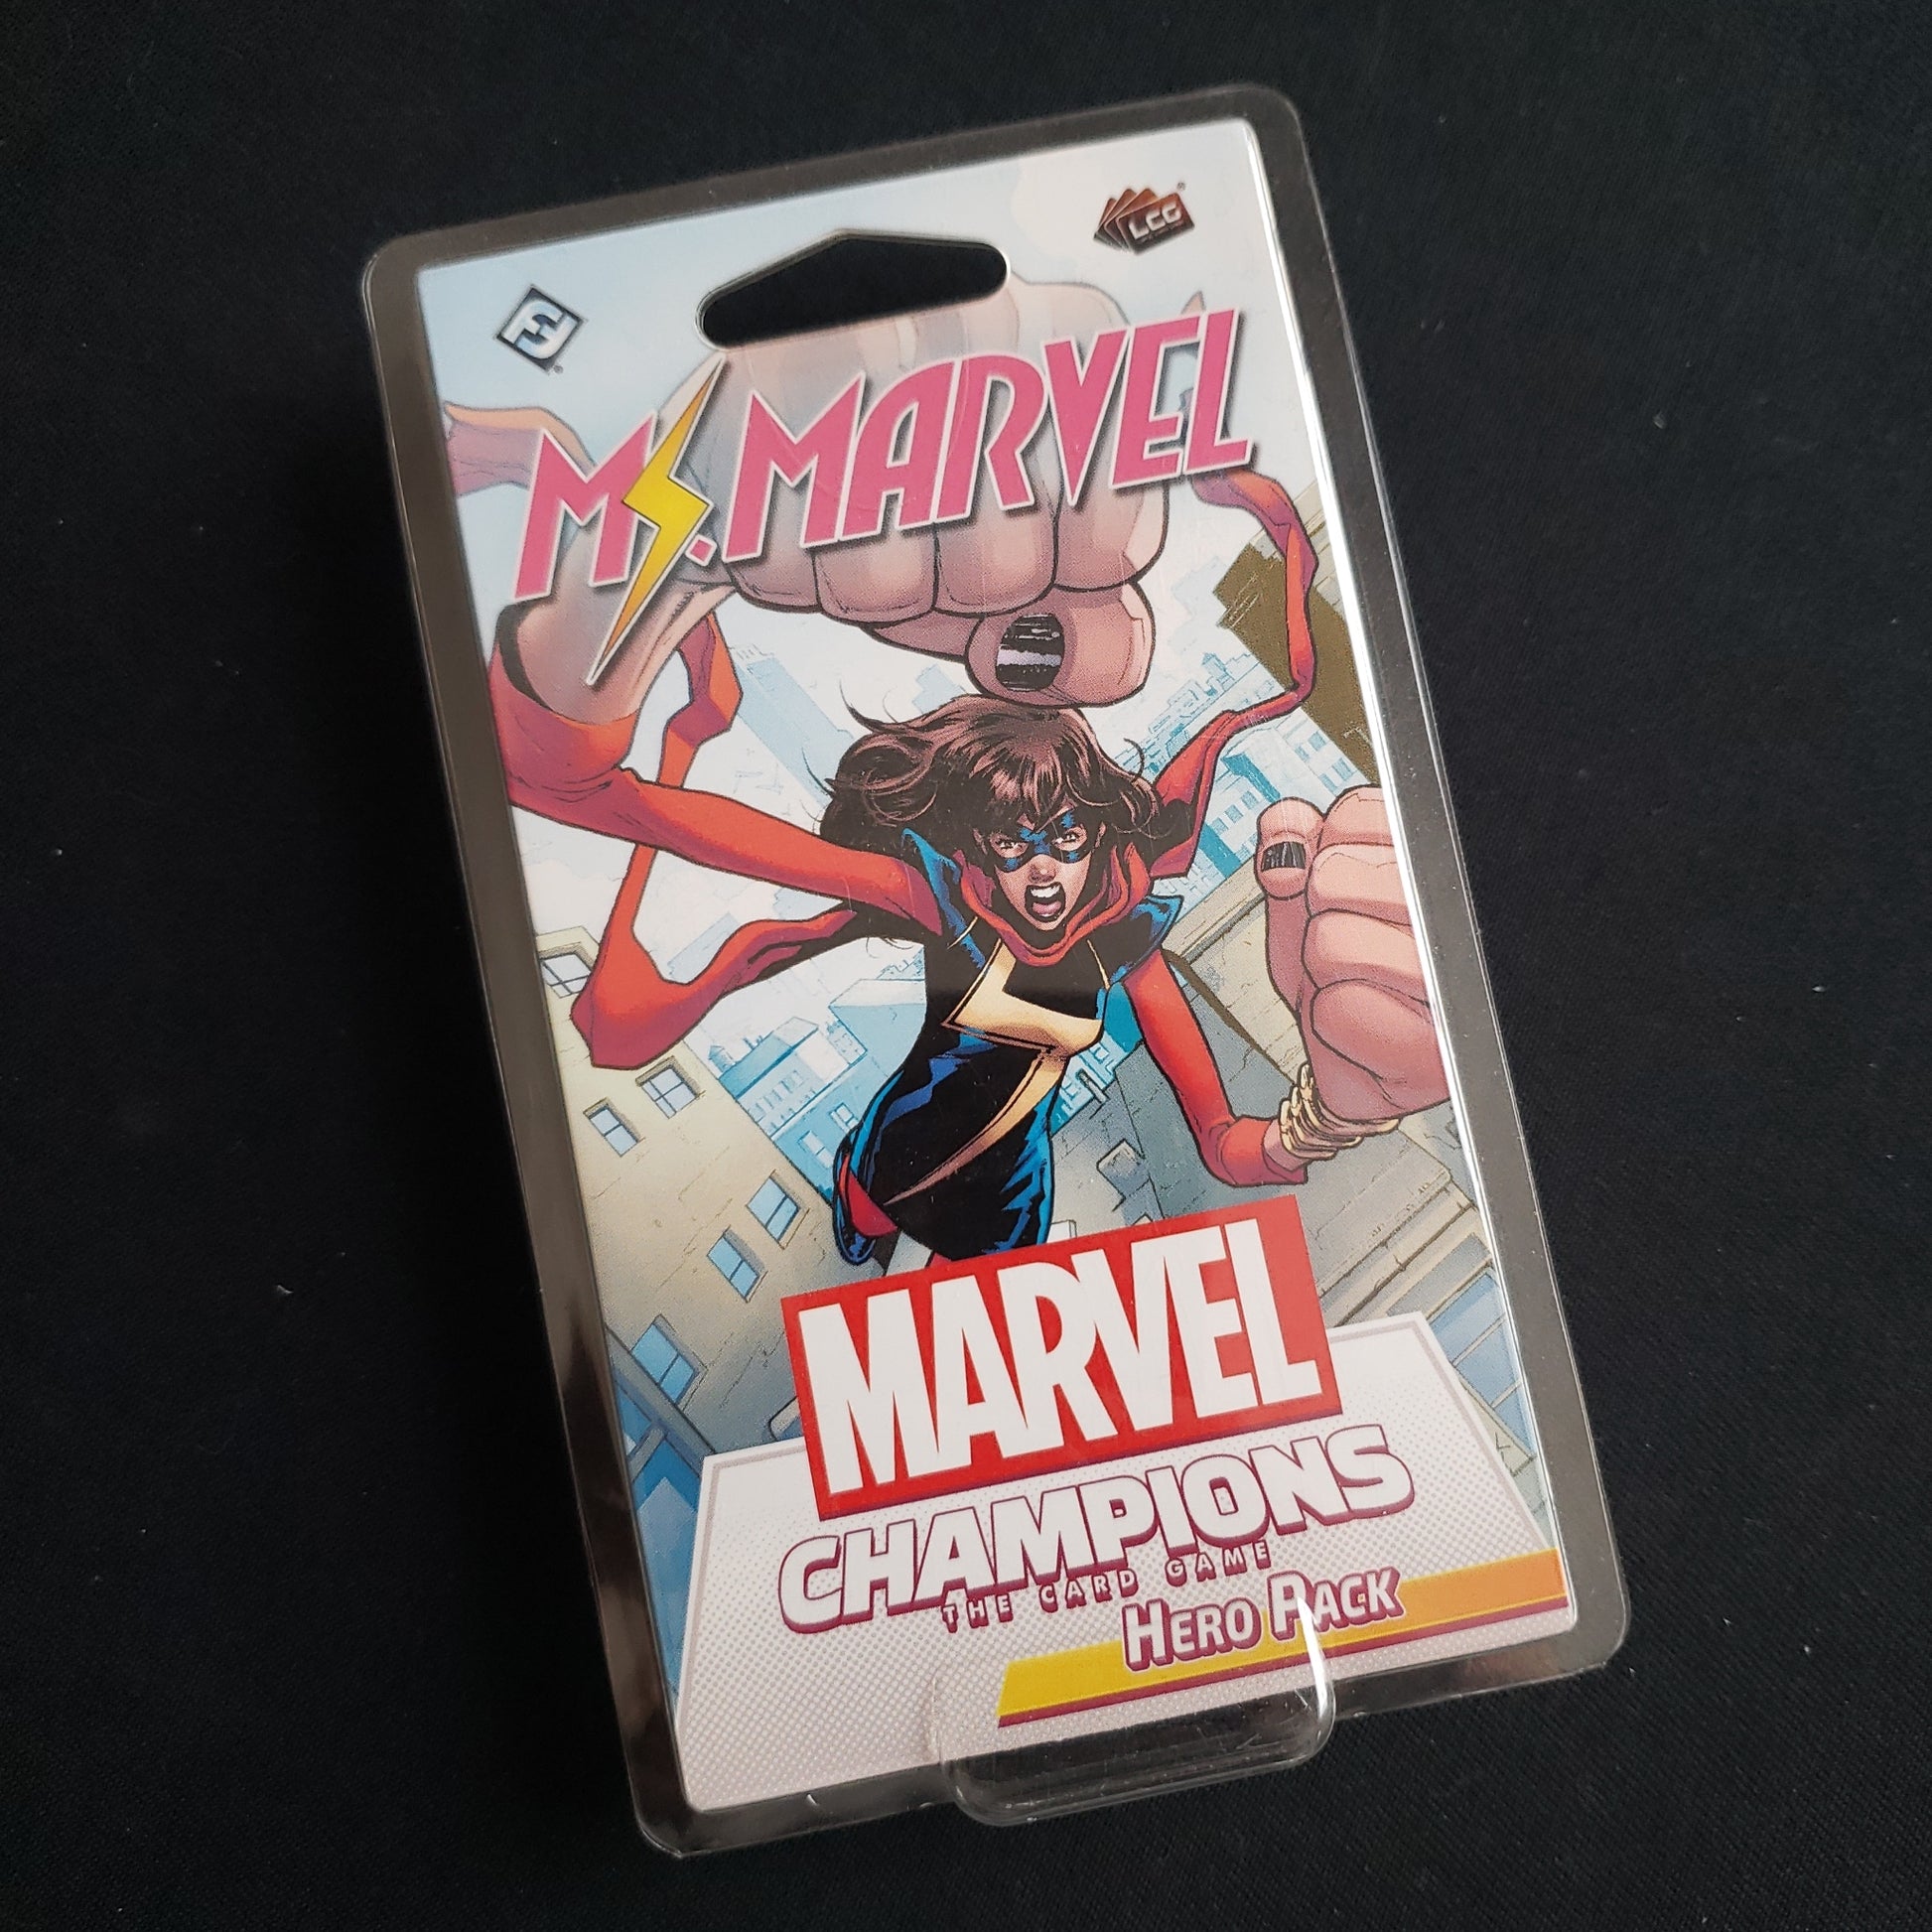 Image shows the front of the package for the Ms. Marvel Hero Pack for the Marvel Champions card game